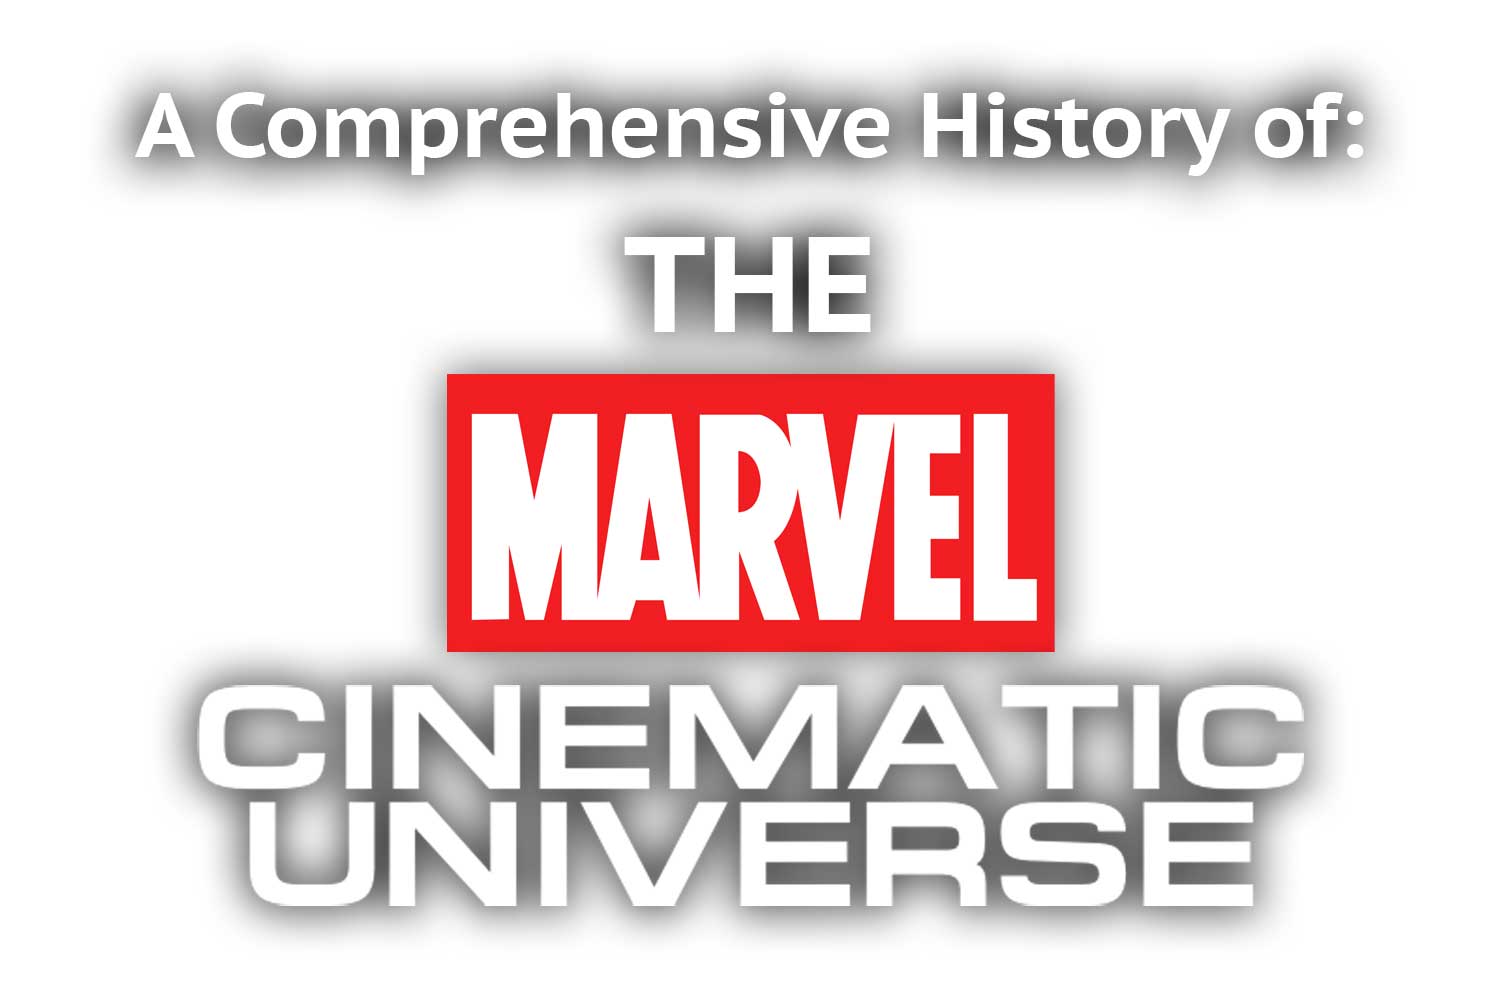 GRAPHIC: "A comprehensive history of: The Marvel Cinematic Universe" Graphic by The Signal reporter Miles Shellshear.